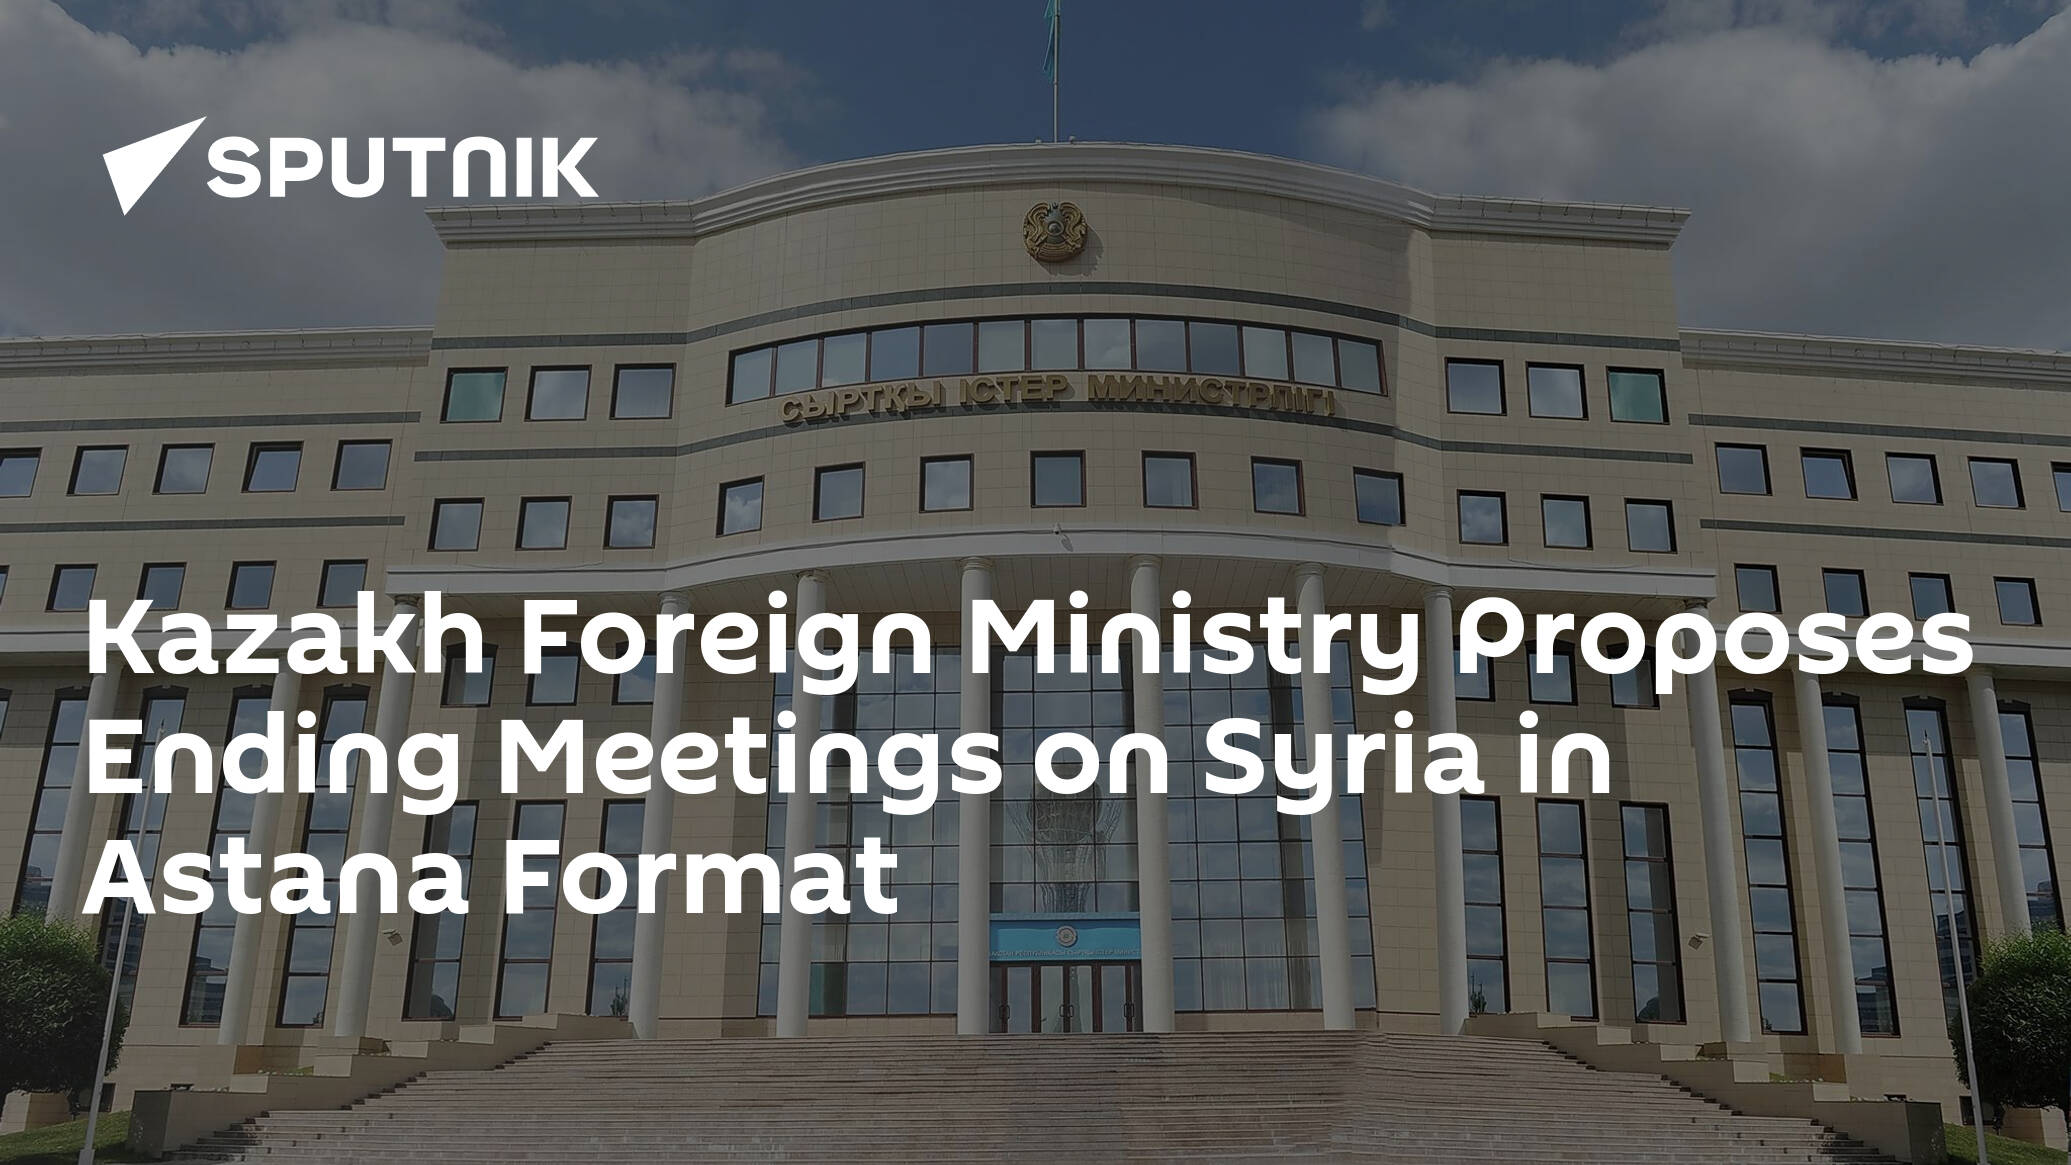 Kazakh Foreign Ministry Proposes Ending Meetings on Syria in Astana Format